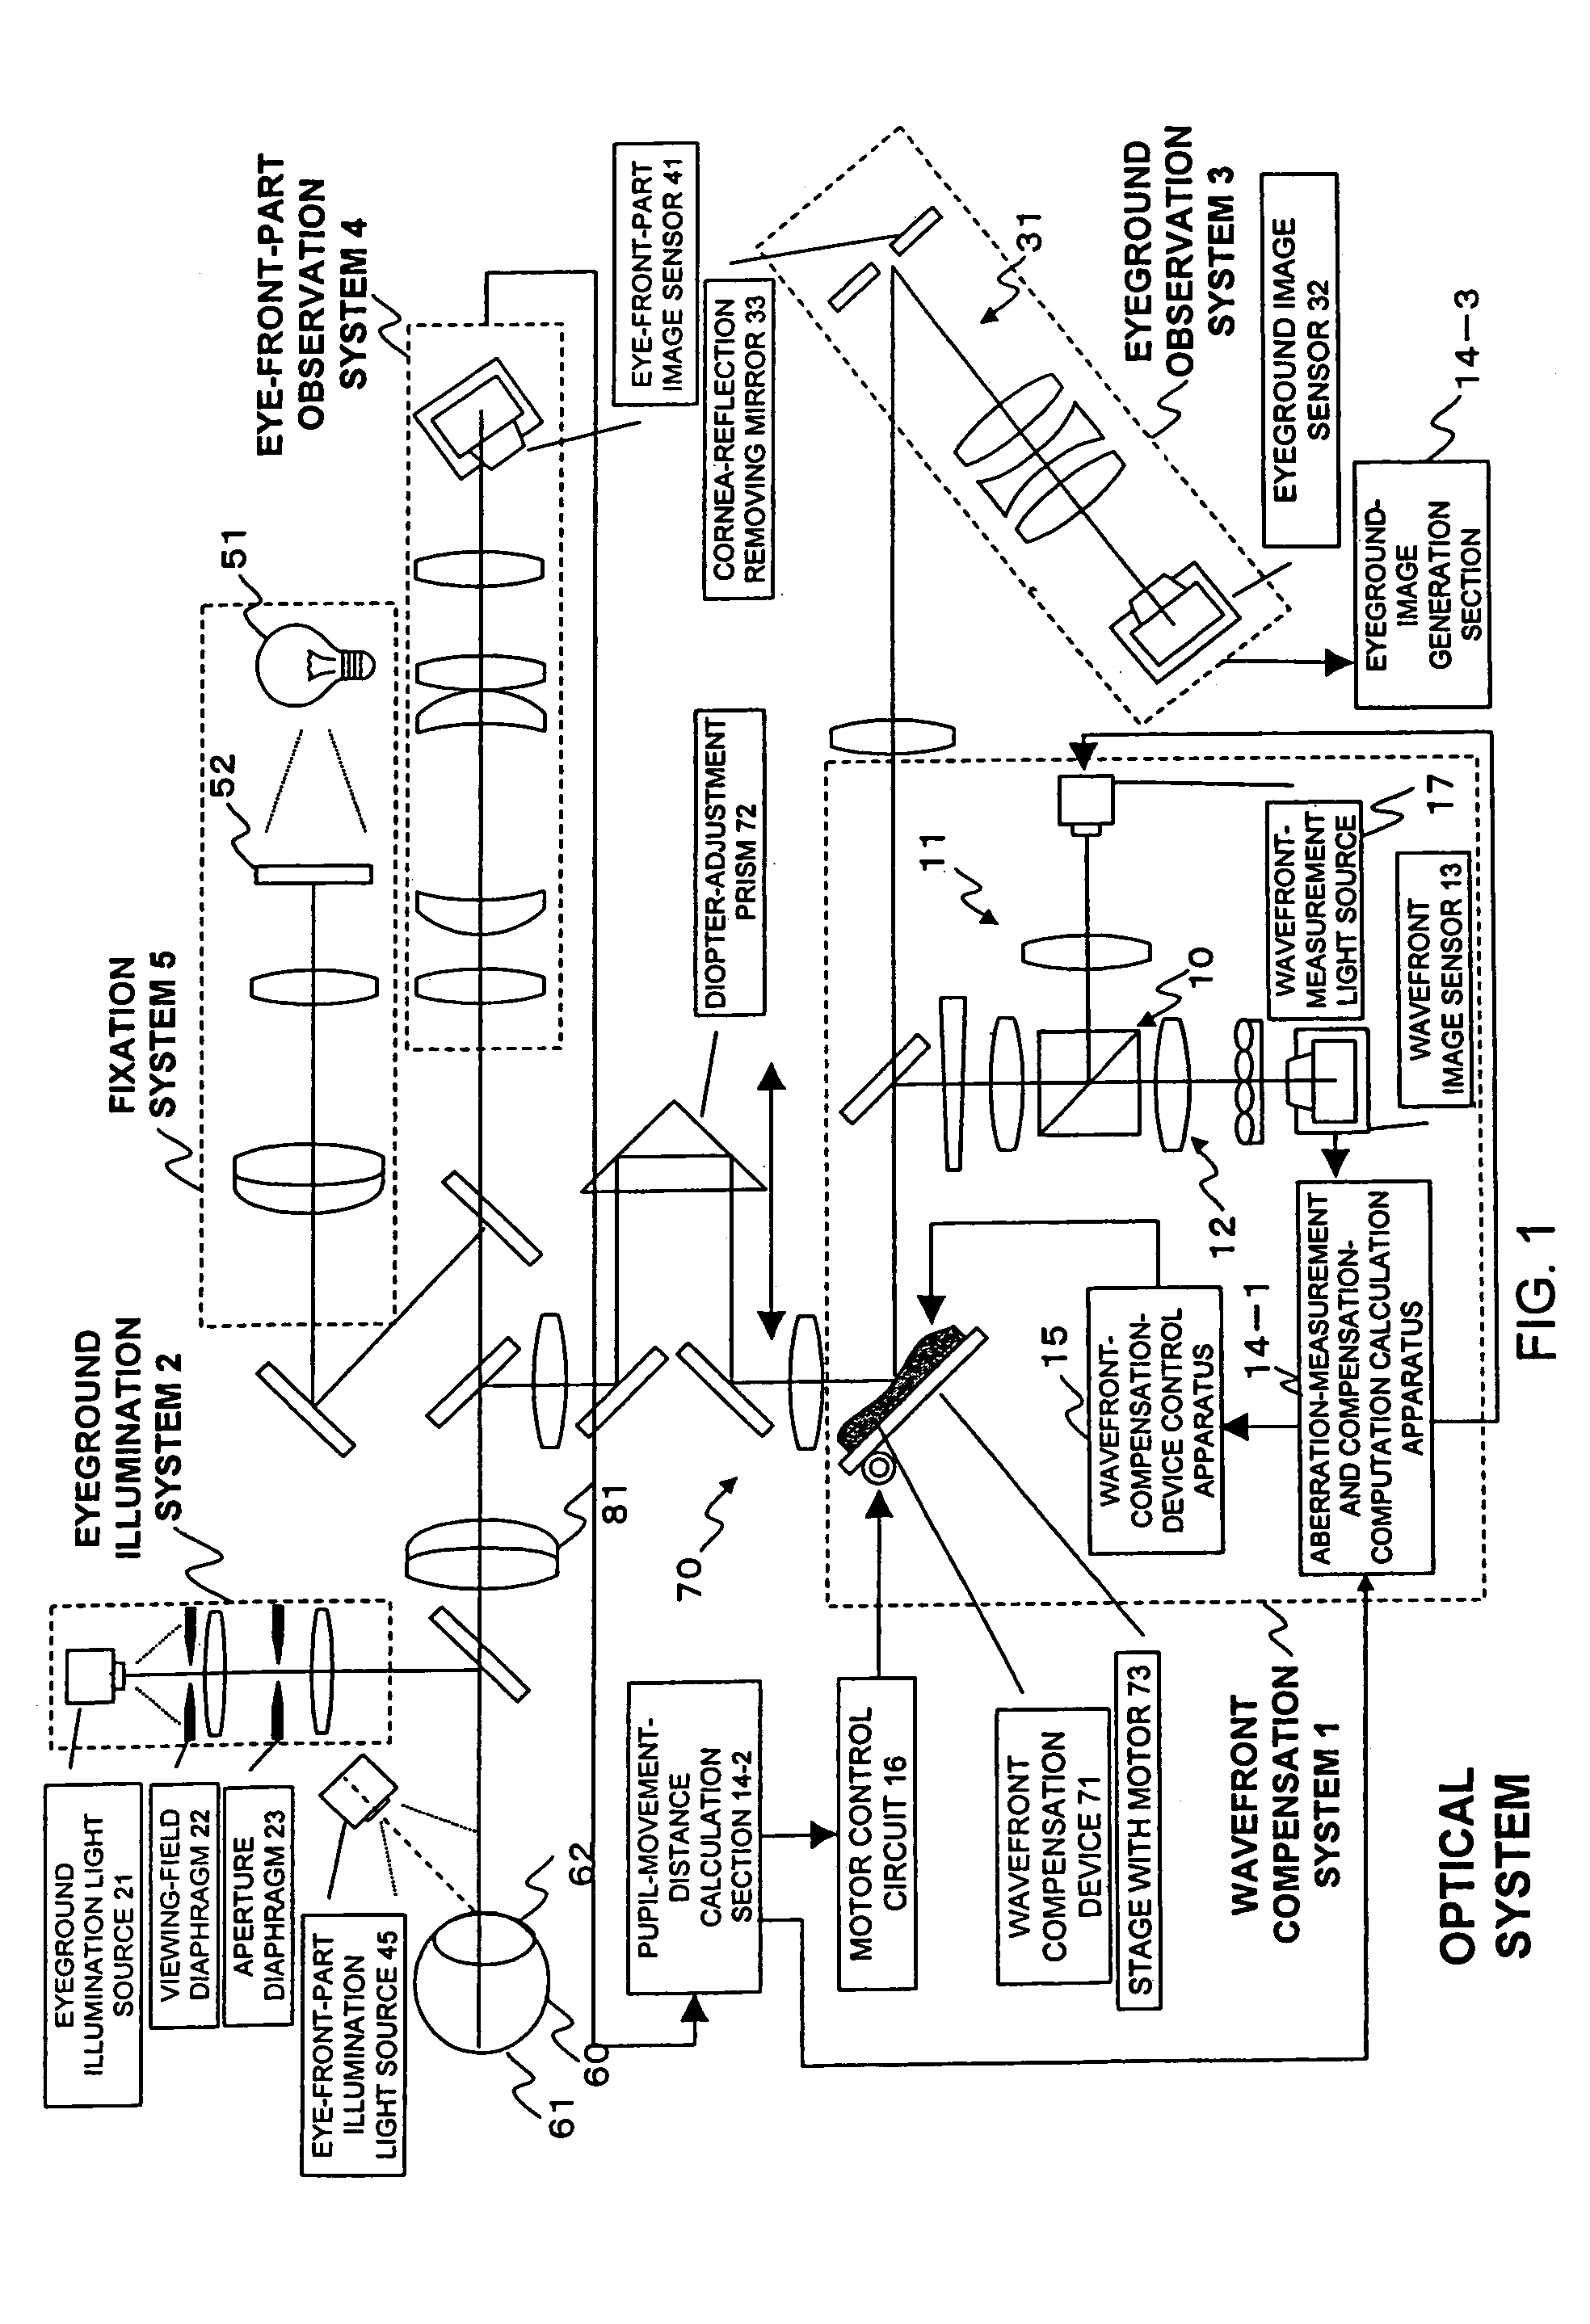 Optical-characteristic measurement apparatus and fundus-image observation apparatus